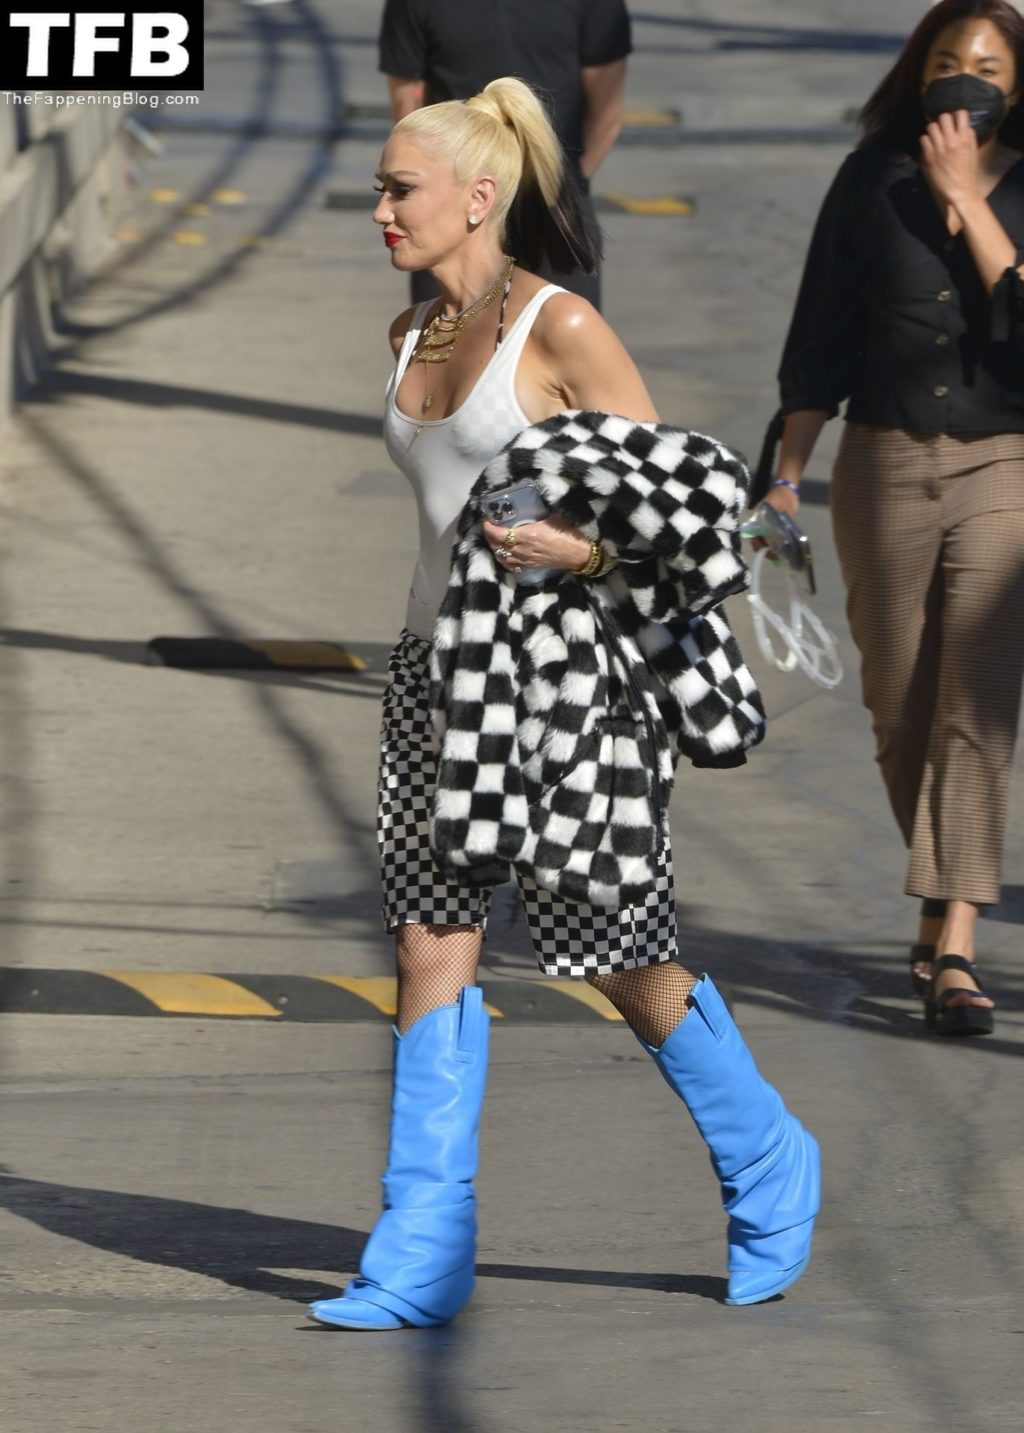 Gwen Stefani Sexy The Fappening Blog 33 1024x1433 - Gwen Stefani Arrives For an Appearance on Jimmy Kimmel Live! (87 Photos)